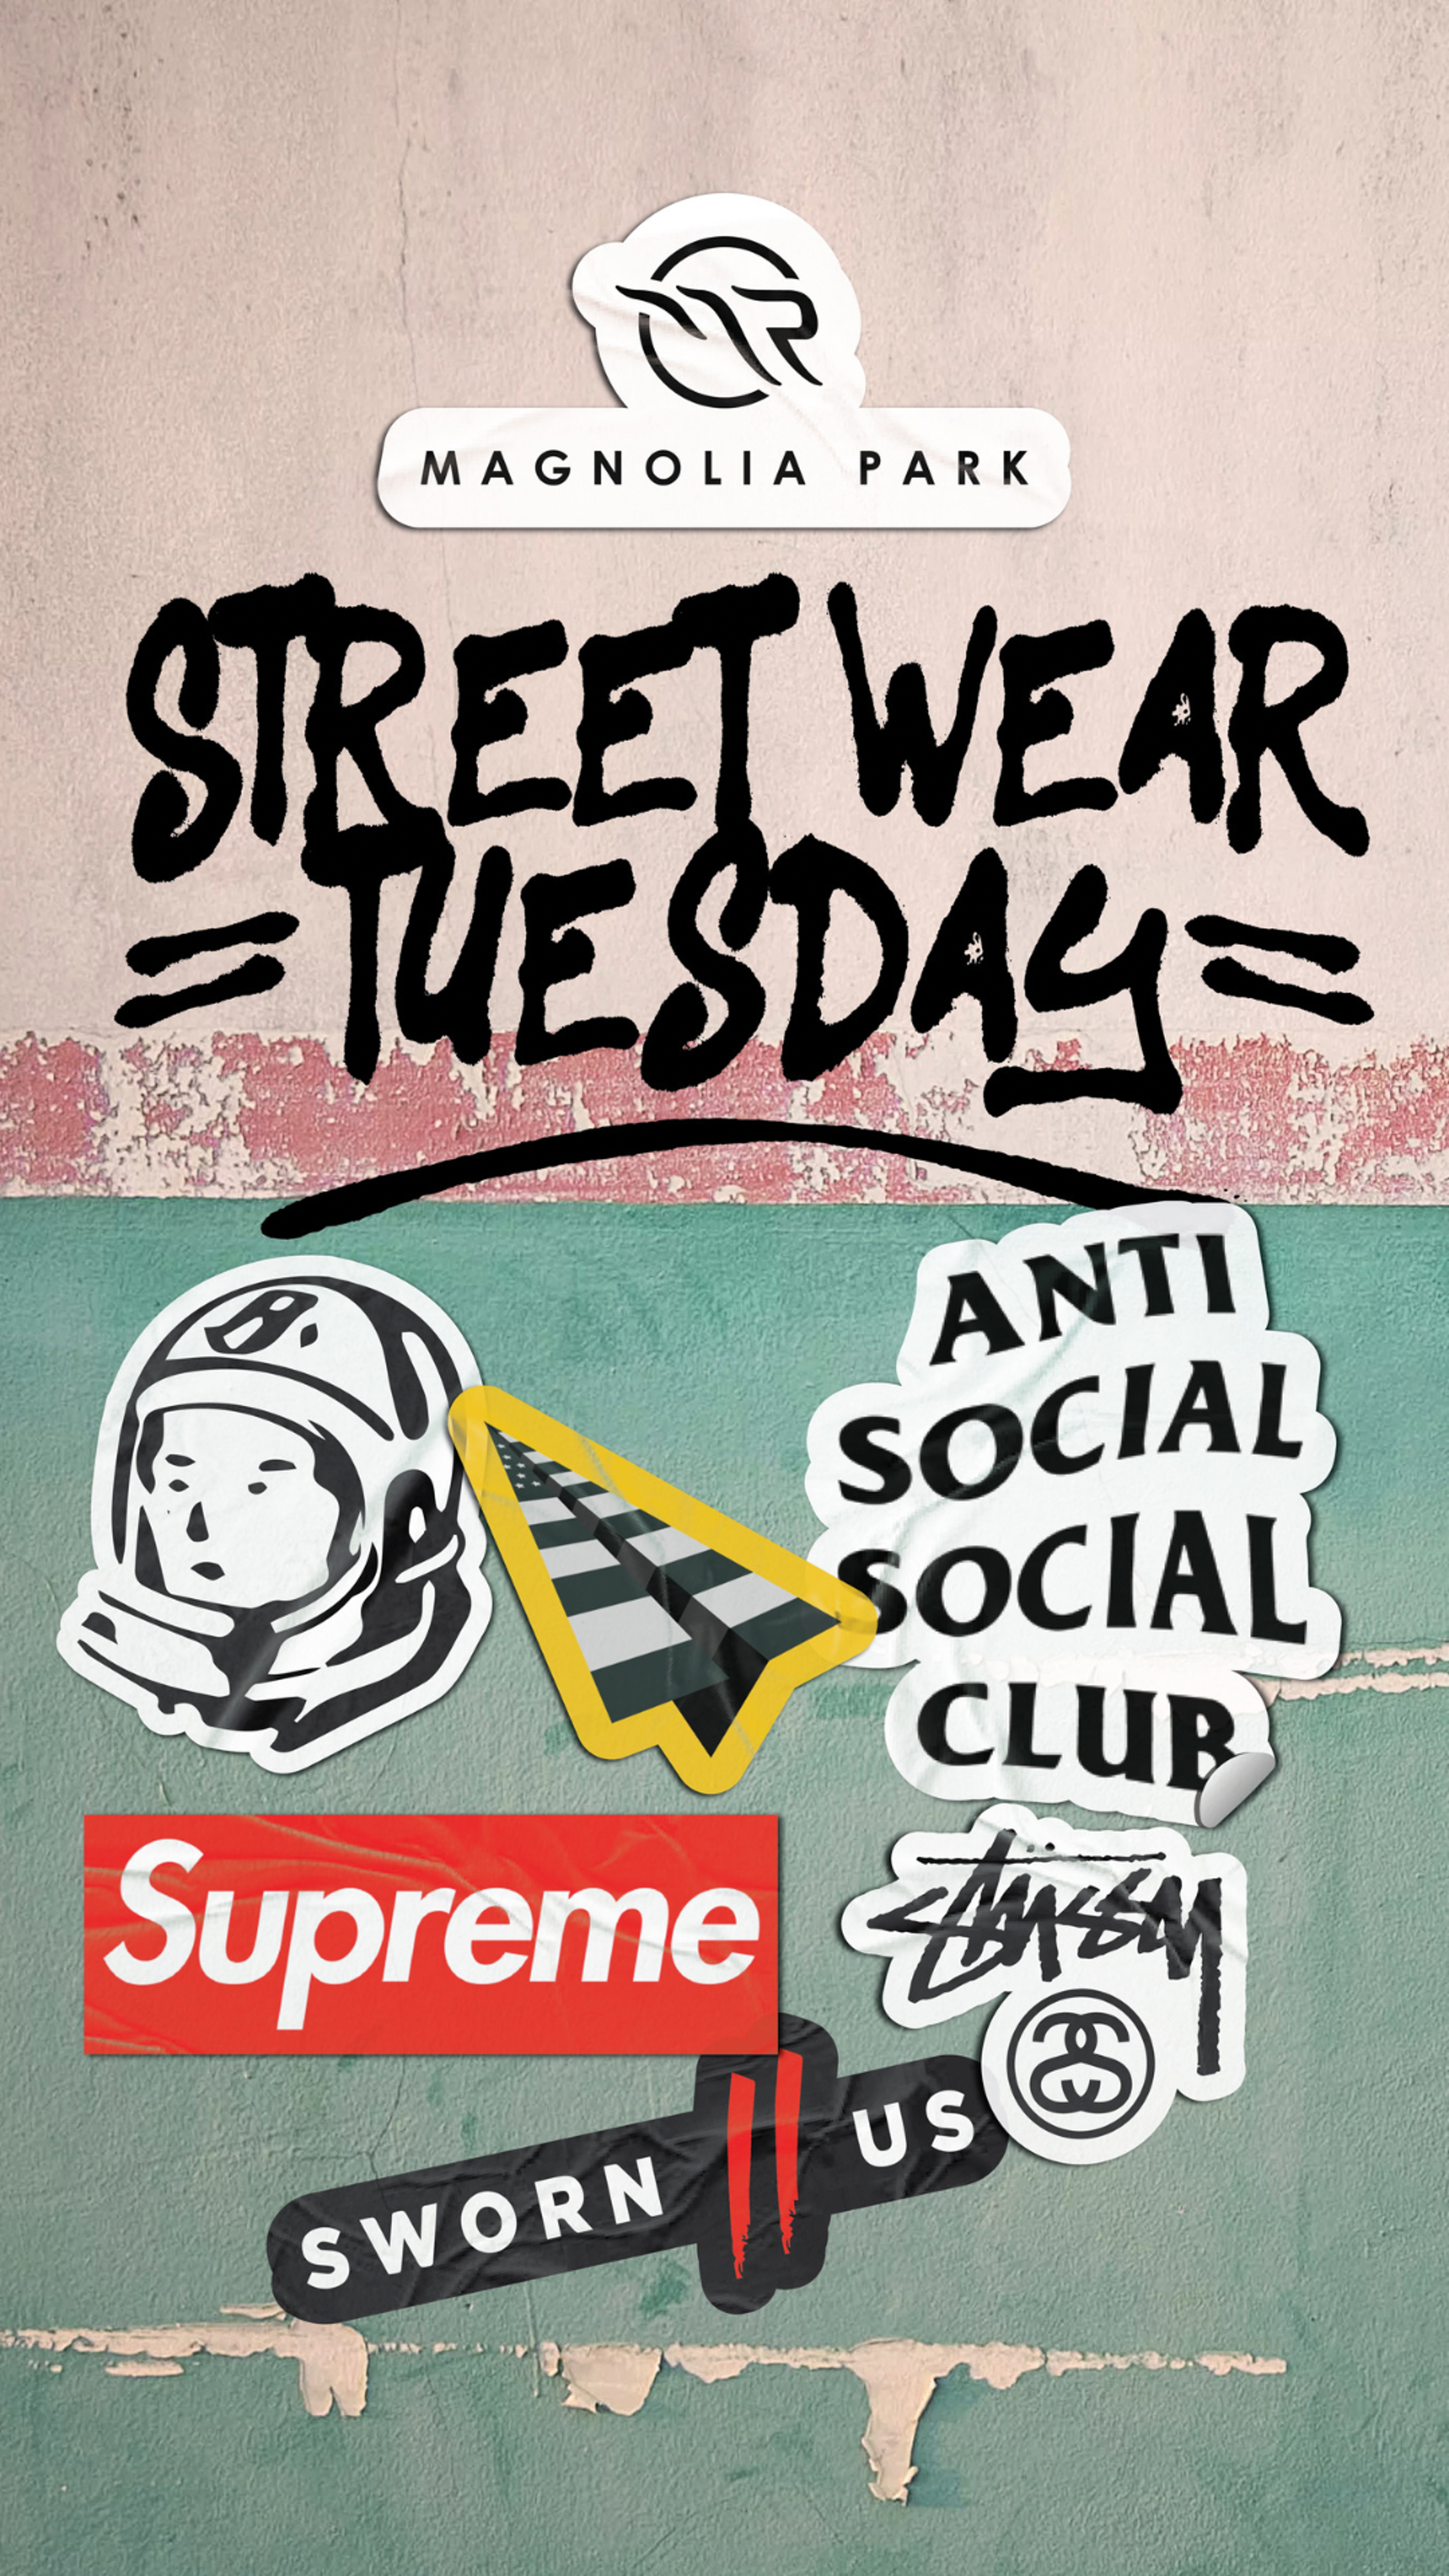 Preview image for the show titled "
STREETWEAR TUESDAY - ASSC, SWORN, BBC, ICE CREAM & MORE" at Tomorrow @ 12:00 AM